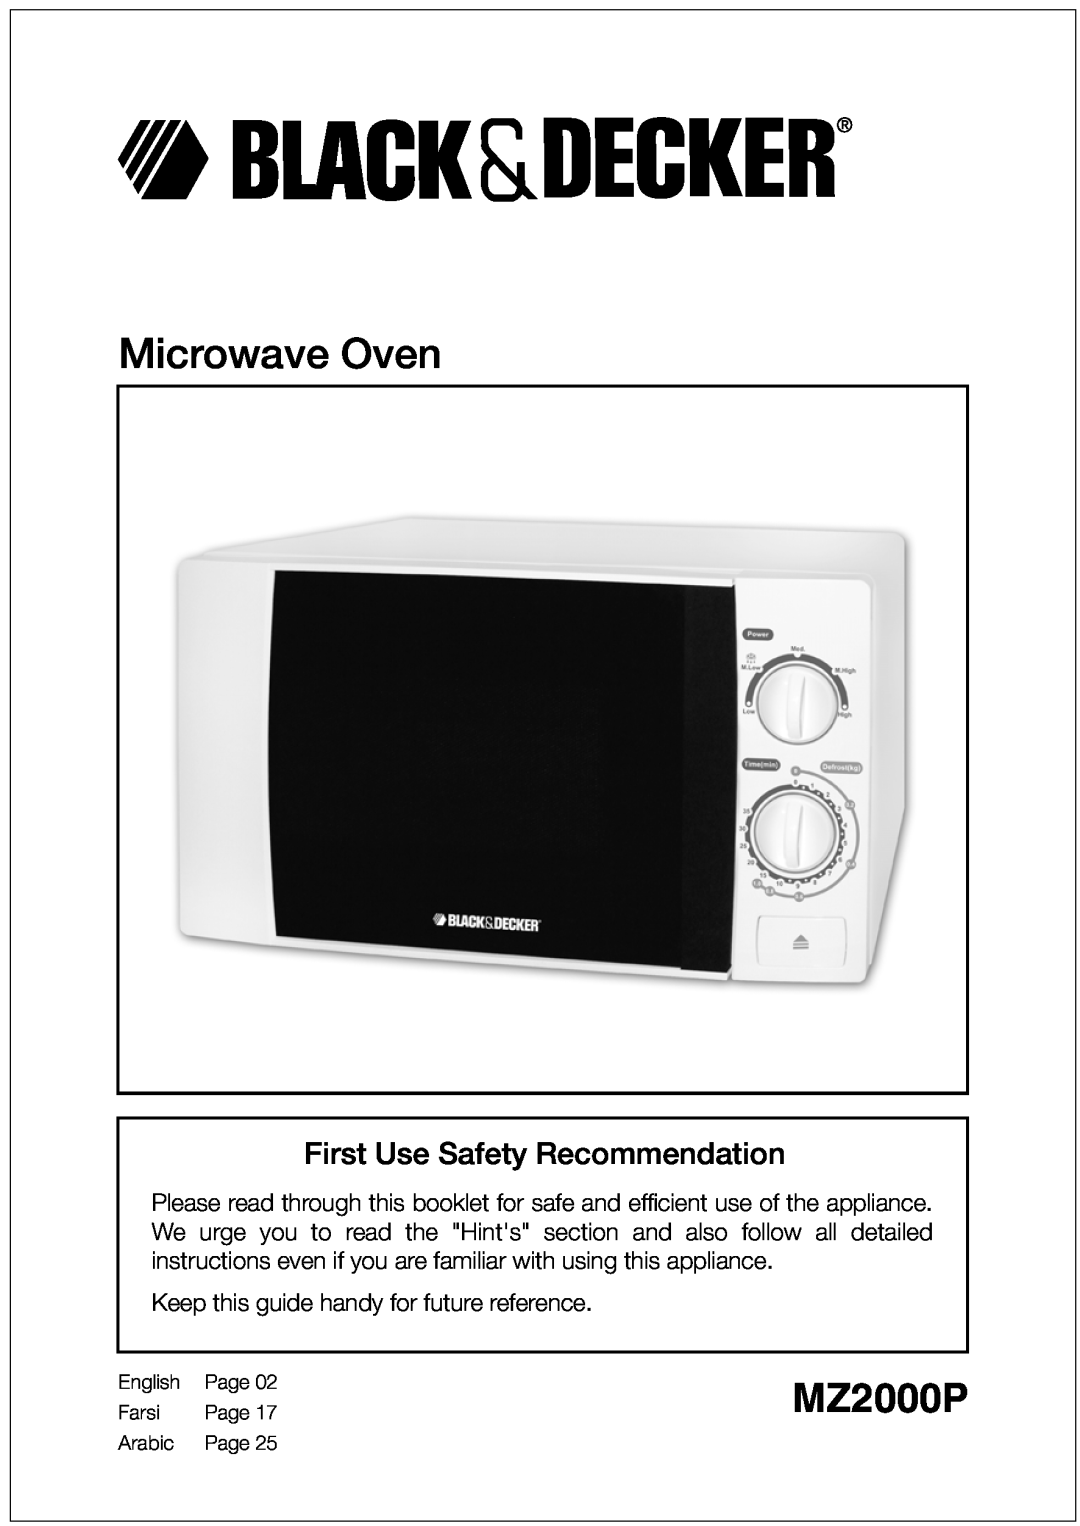 Black & Decker MZ2000P manual First Use Safety Recommendation, Microwave Oven 